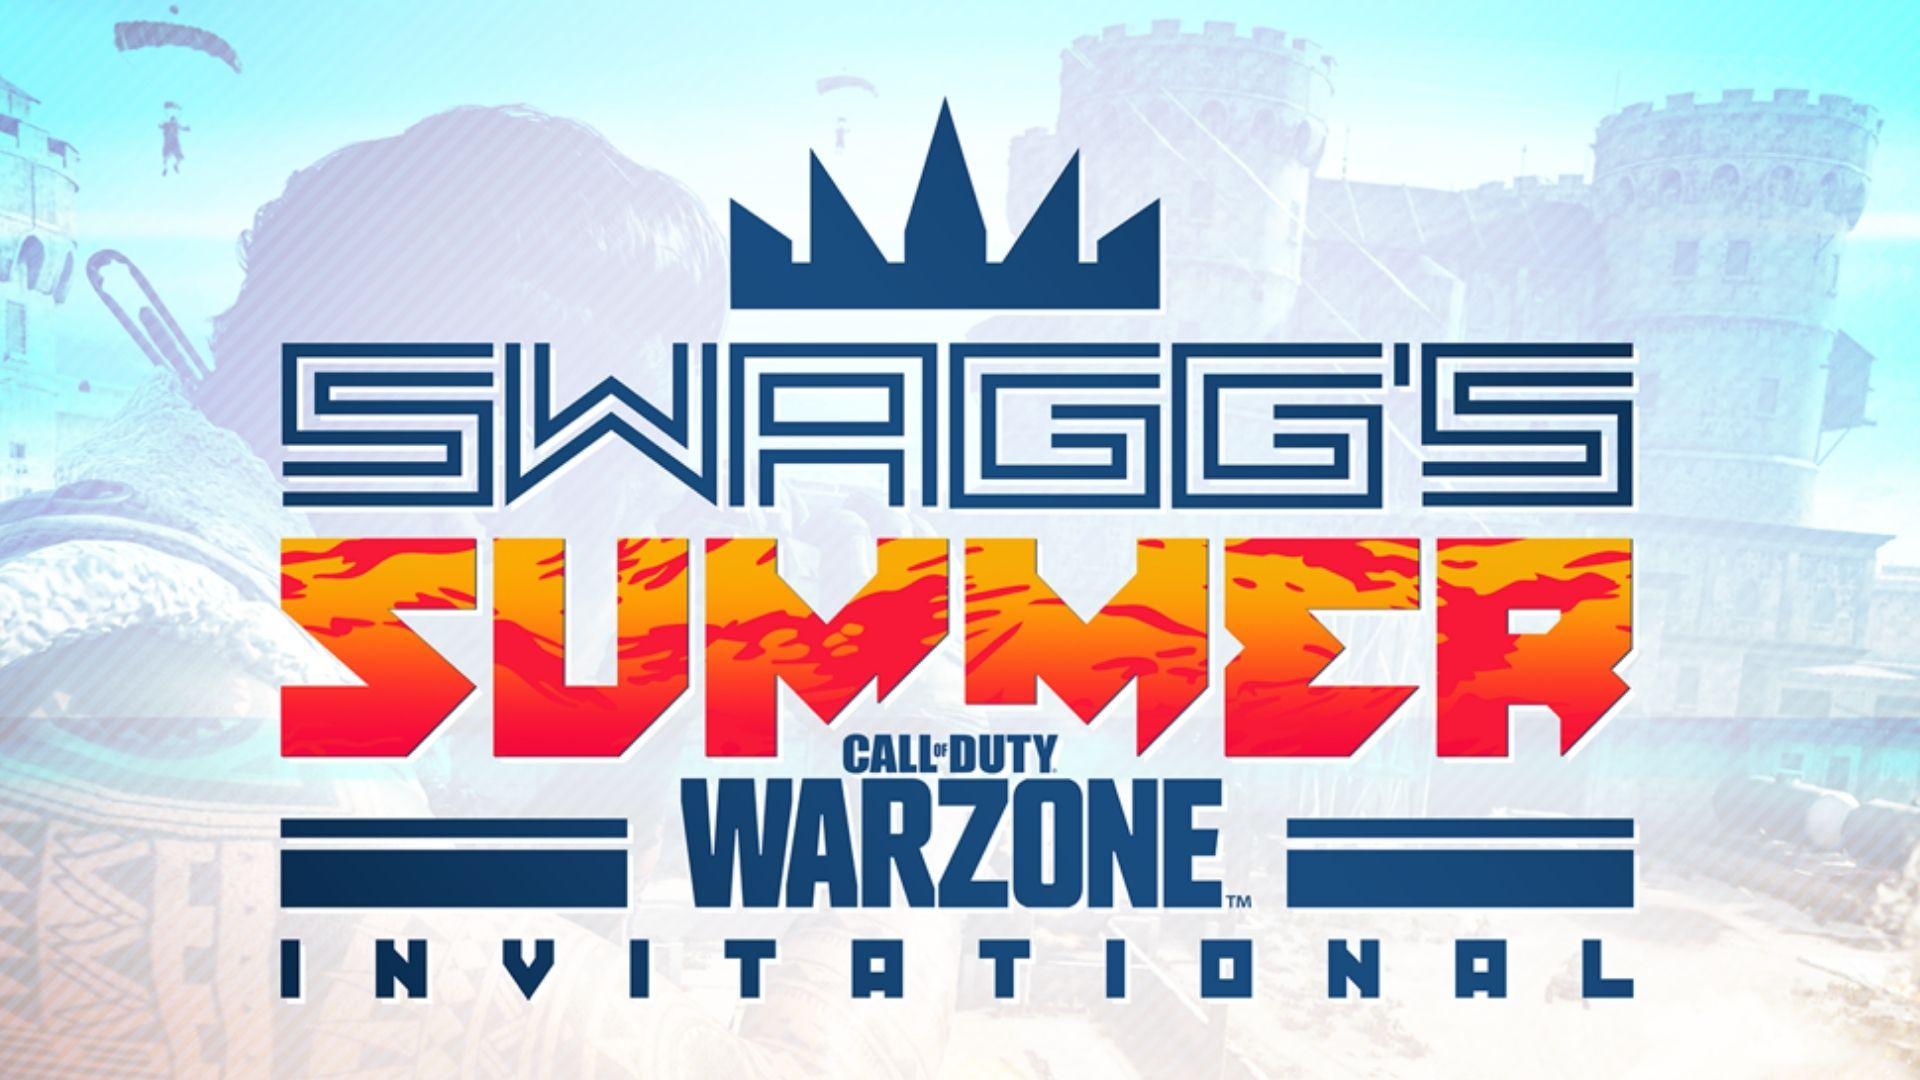 FaZe Swagg ☢️ on X: World Series of Warzone coming up this week. Excited,  tournament today along with some ranked. New warzone map around the corner  run it   / X